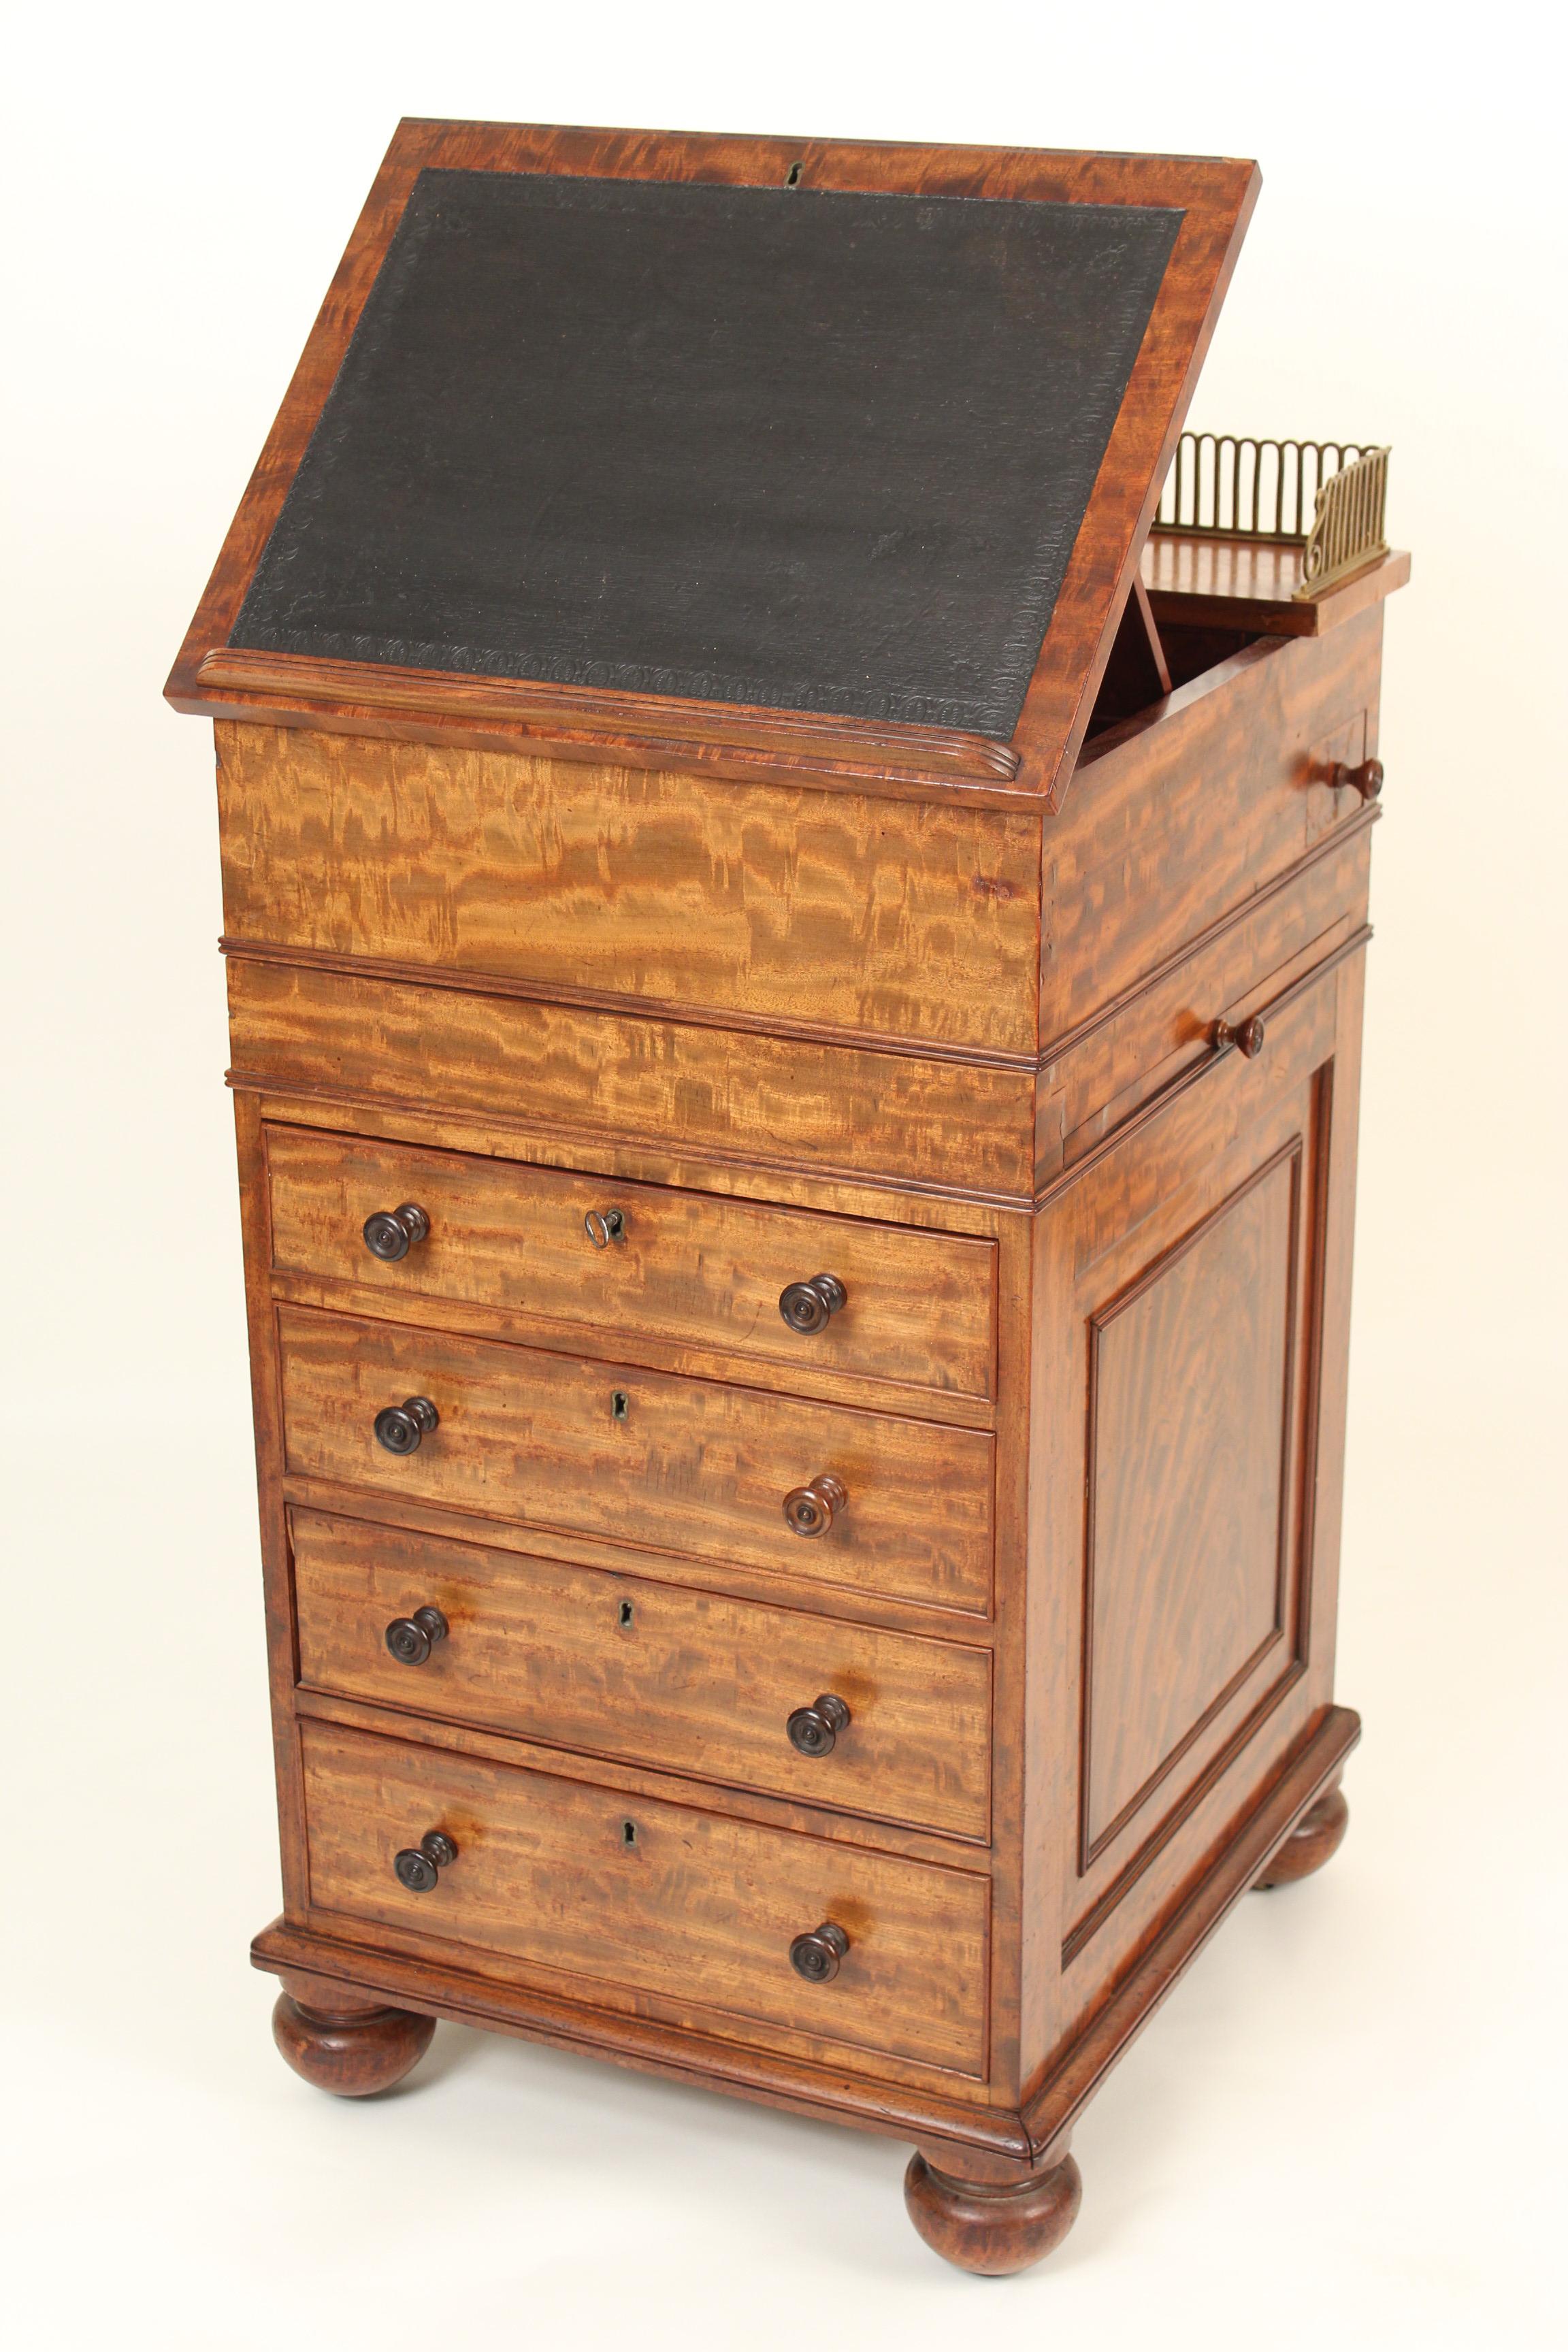 English plum pudding mahogany Davenport desk with adjustable book rest, mechanical top that slides out to allow for leg space when writing, swiveling pen drawer and leather writing surface, late 19th century. The height of the brass gallery is 38